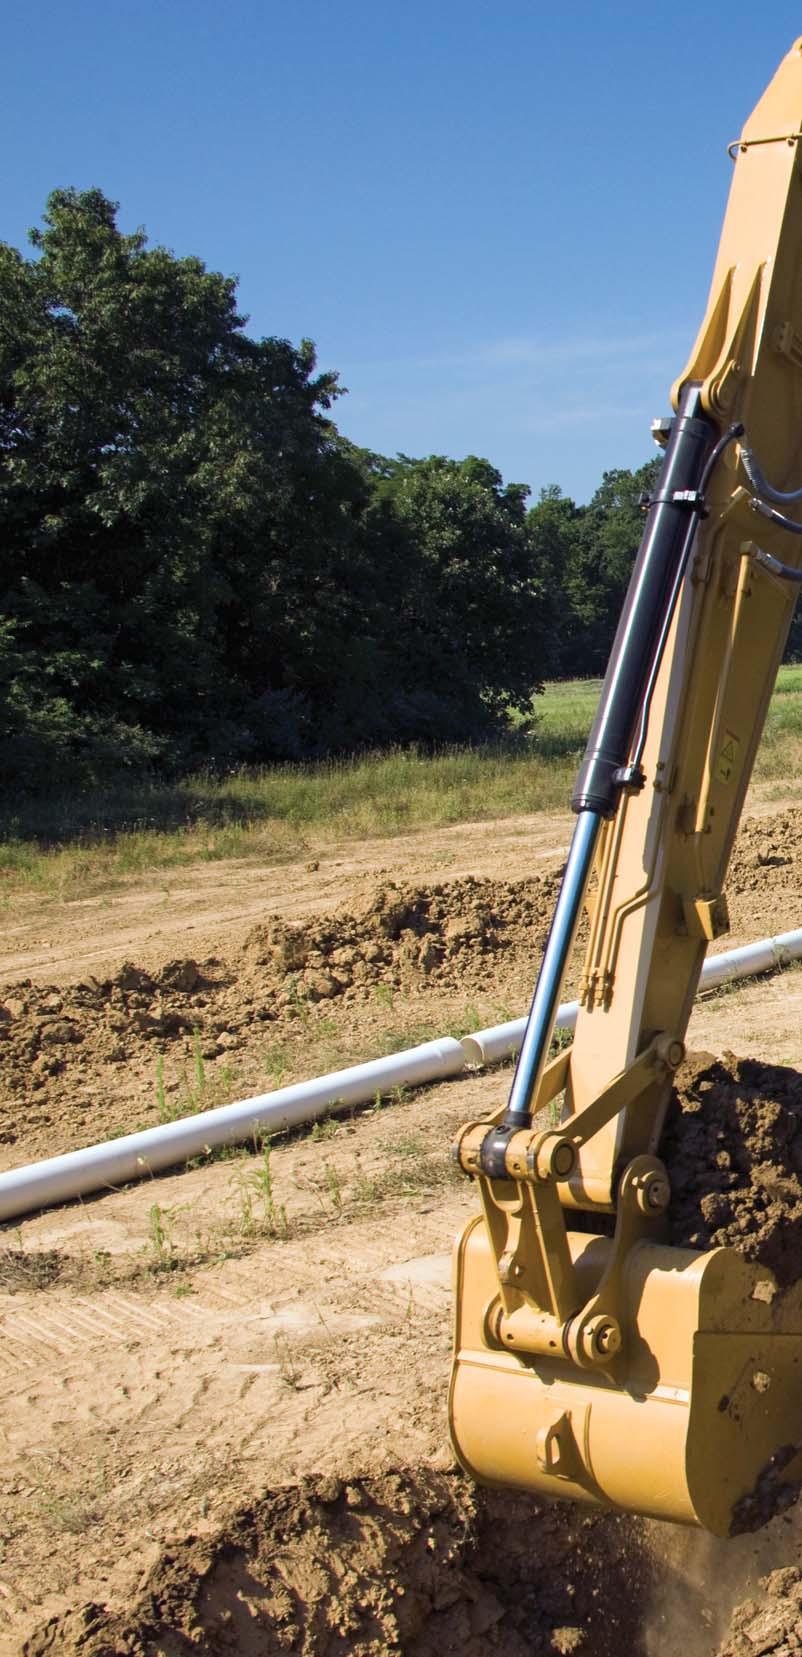 Introduction The Cat 313F L is a perfect choice for customers who value reliability, durability, and maximum efficiency to get work done. Powered by a U.S. EPA Tier 4 Final C4.